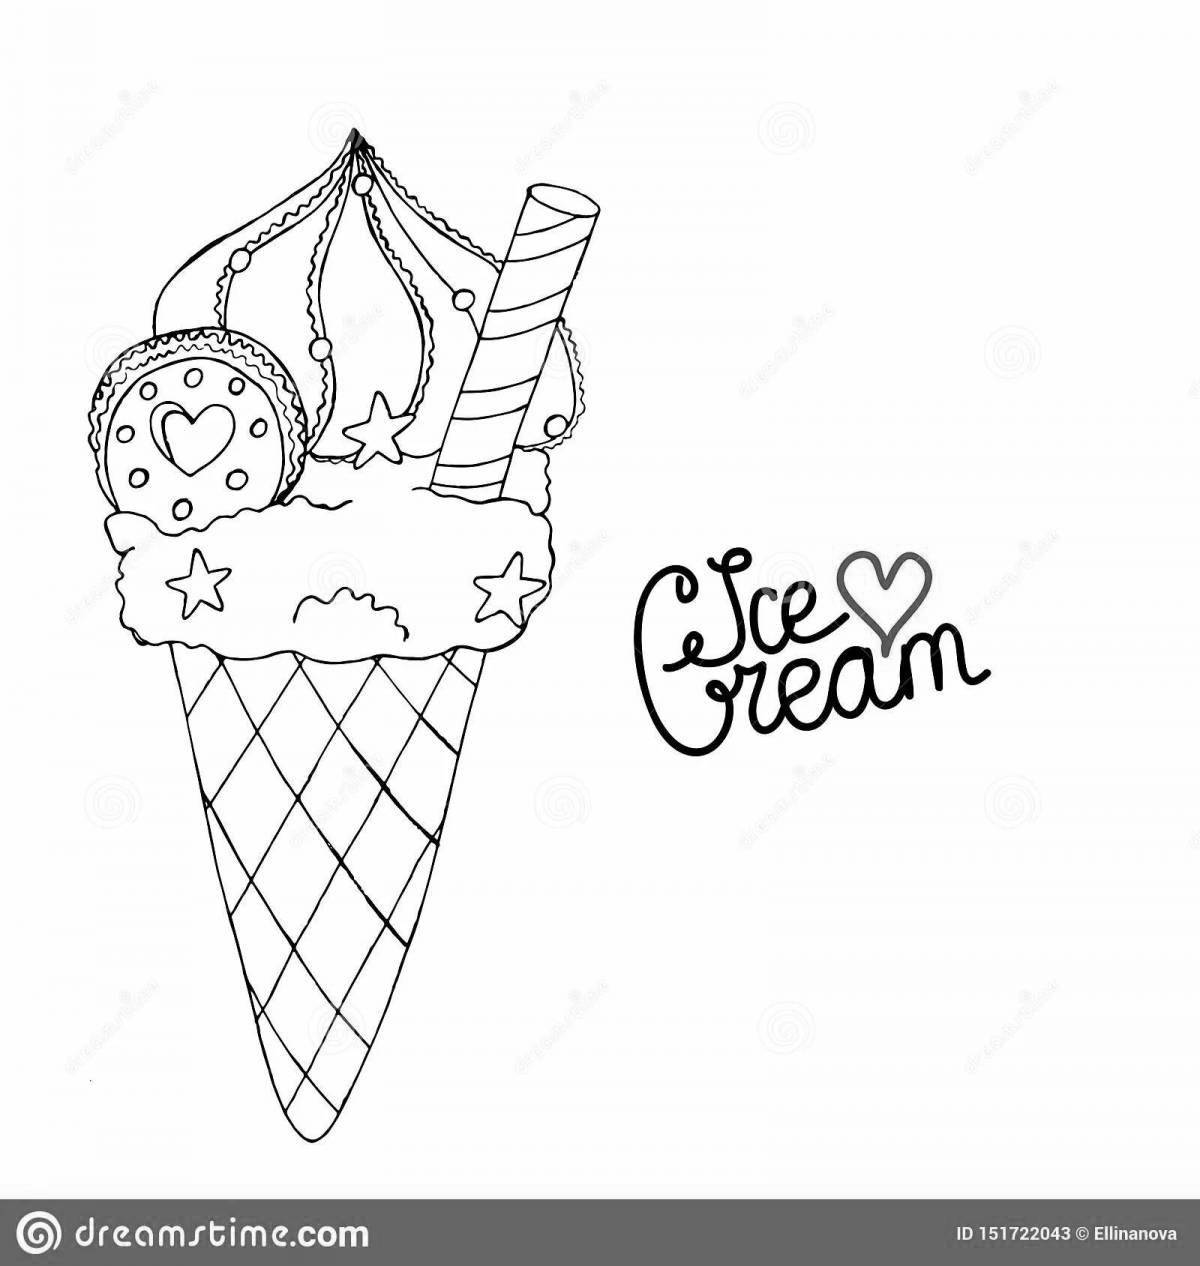 Amazing ice cream coloring page